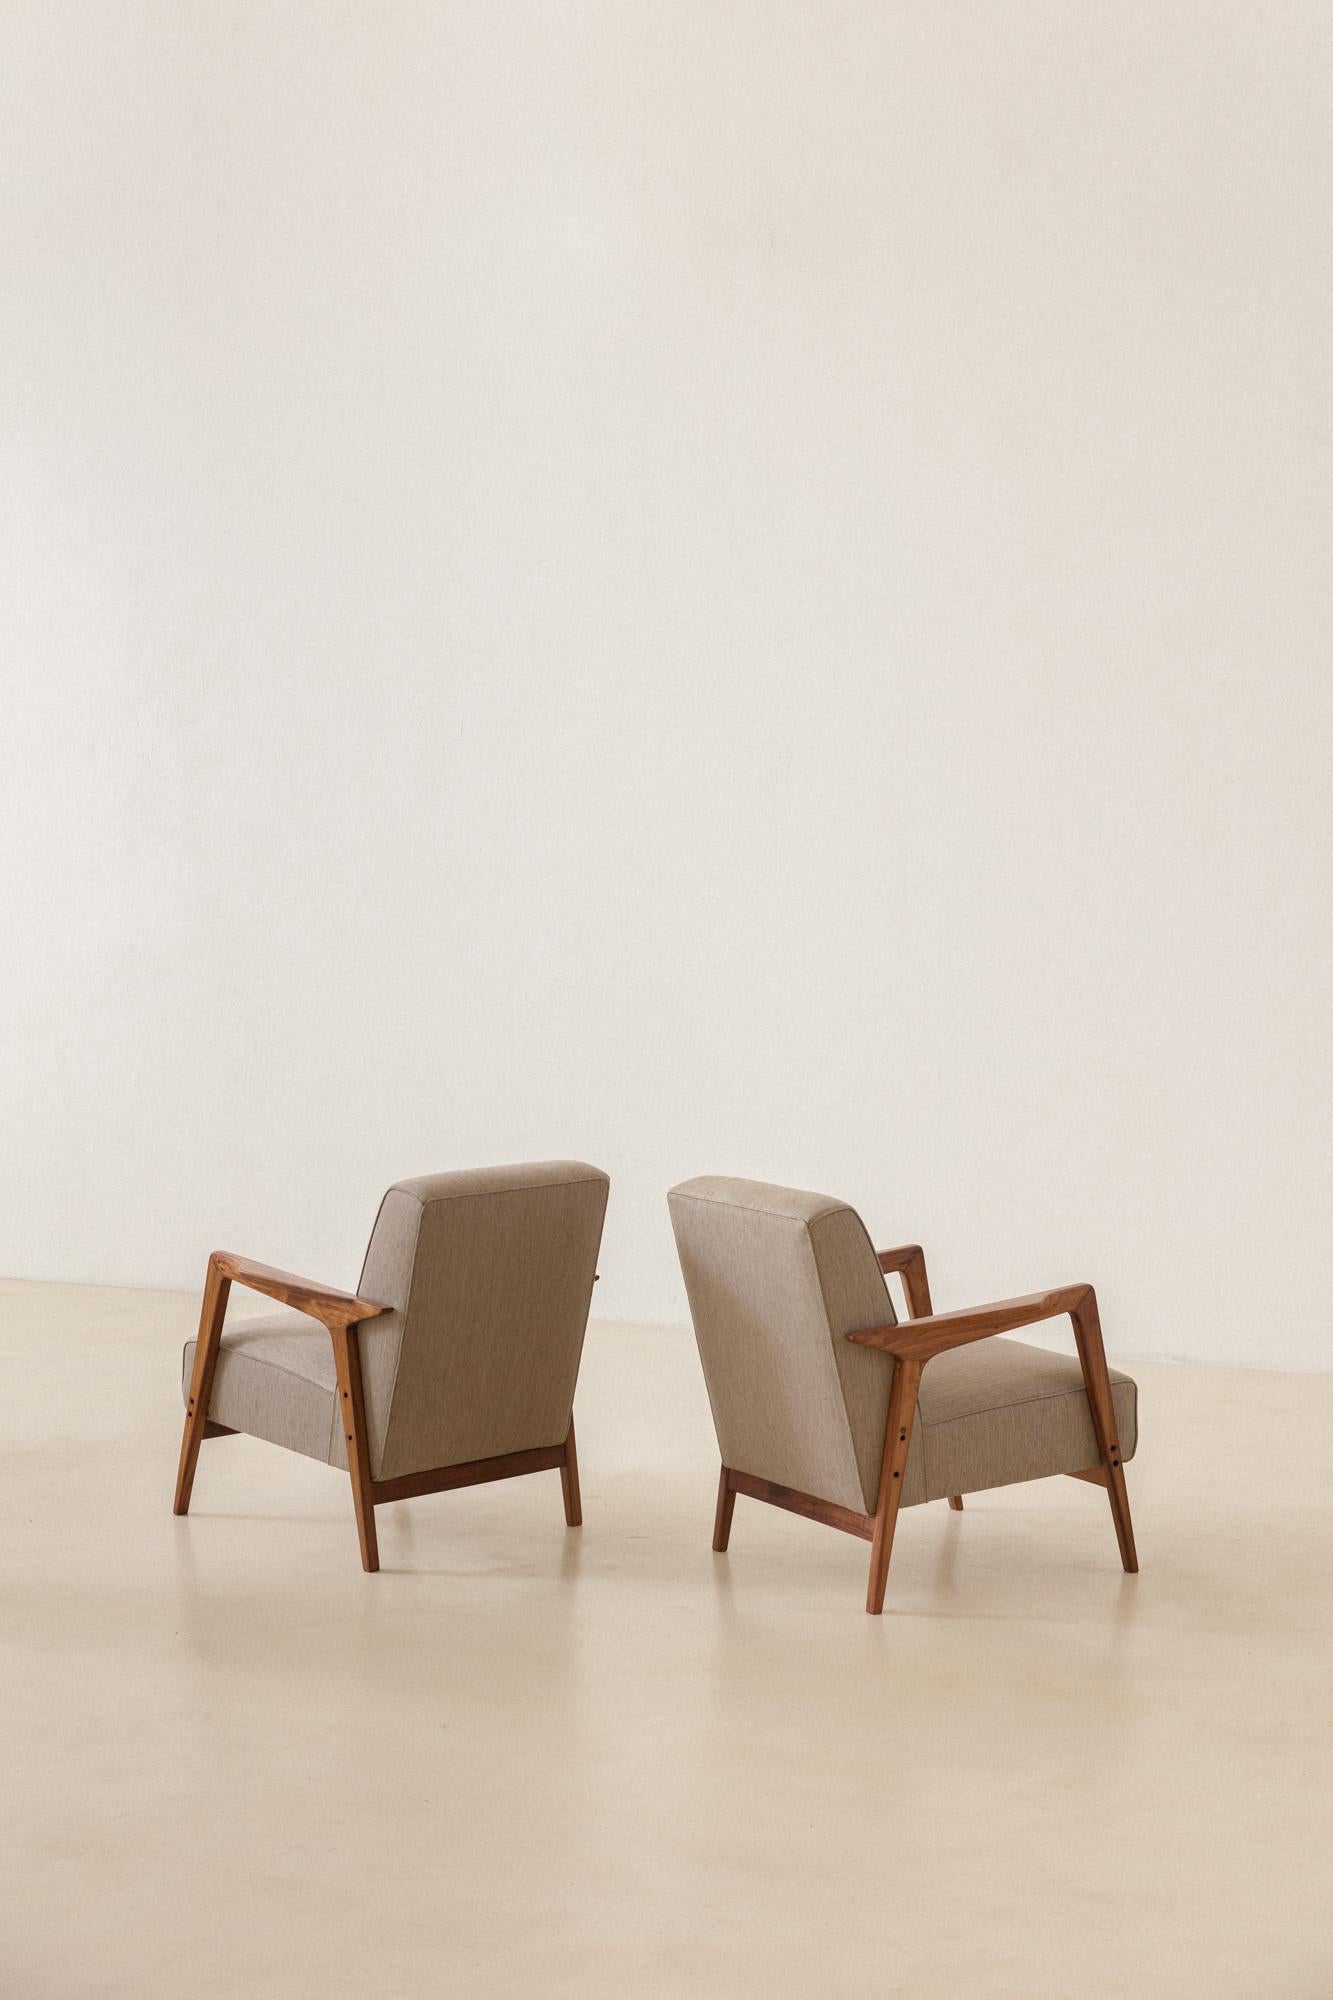 Pair of Armchairs from Hotel Nacional in Brasilia, c. 1960, Midcentury Brazilian In Good Condition For Sale In New York, NY